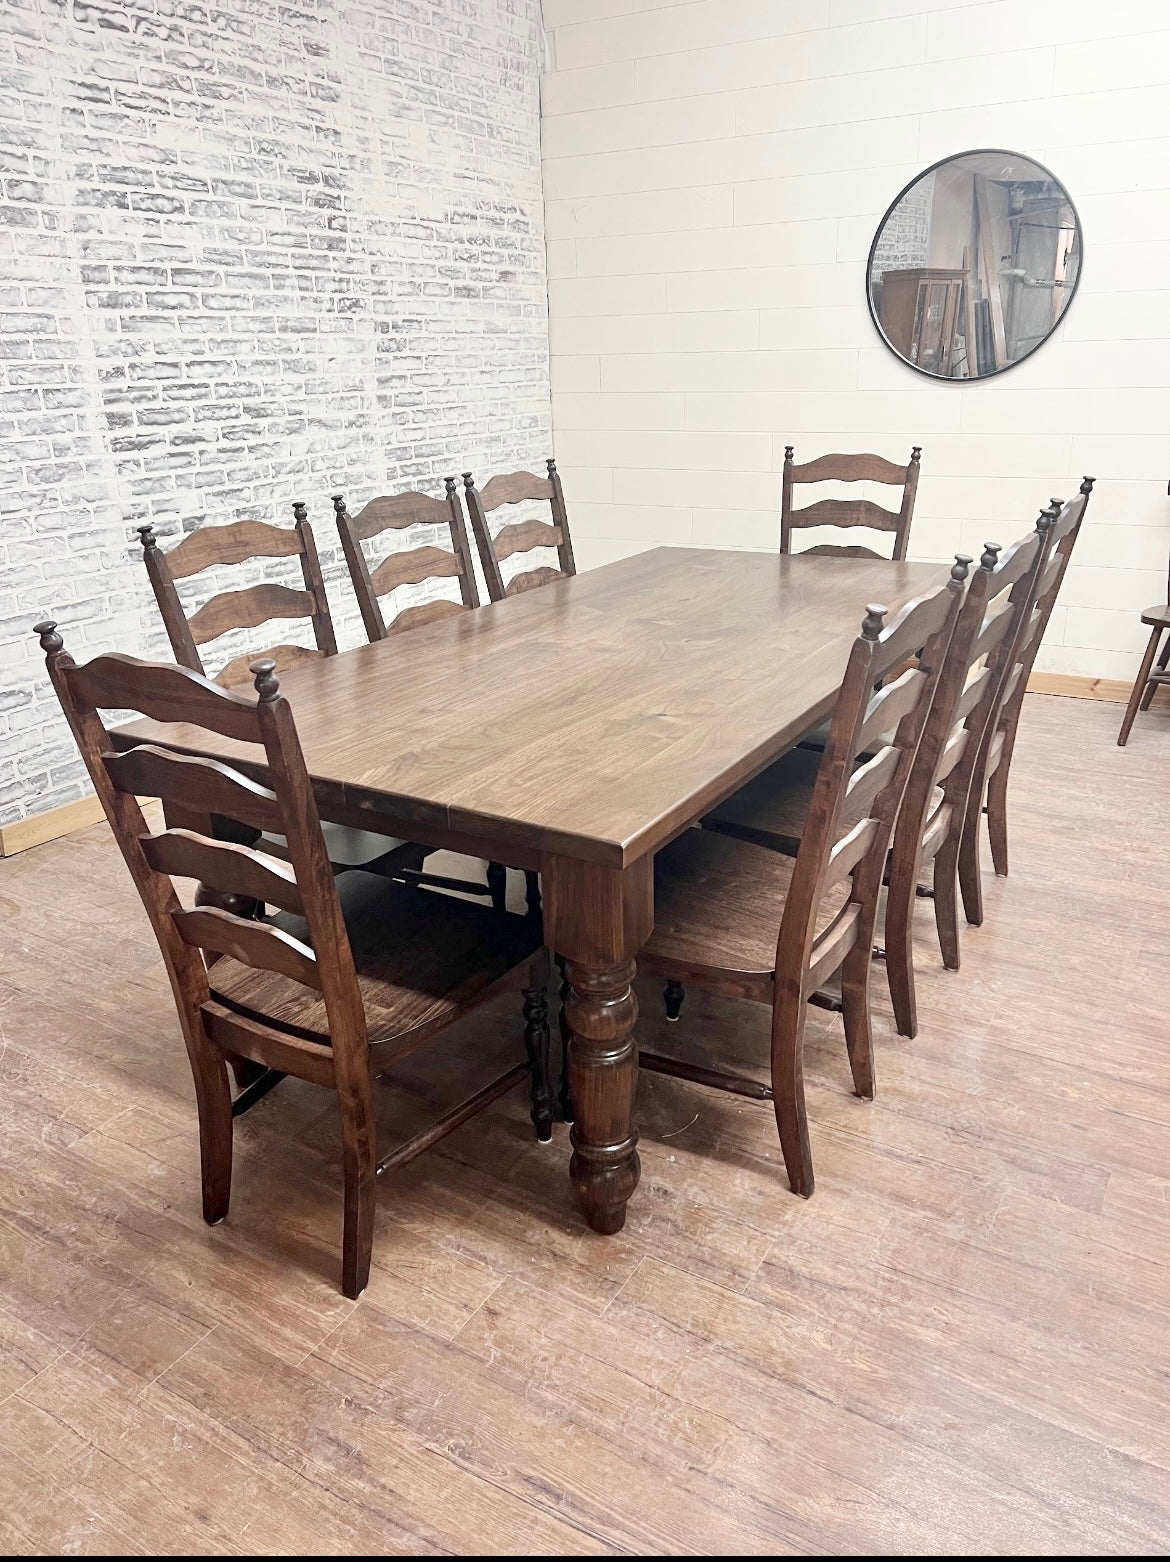 Pictured with an 8' L x 42" W Solid Walnut table with Honey stain. Pictured with 8 Maine Ladder Back Chairs.